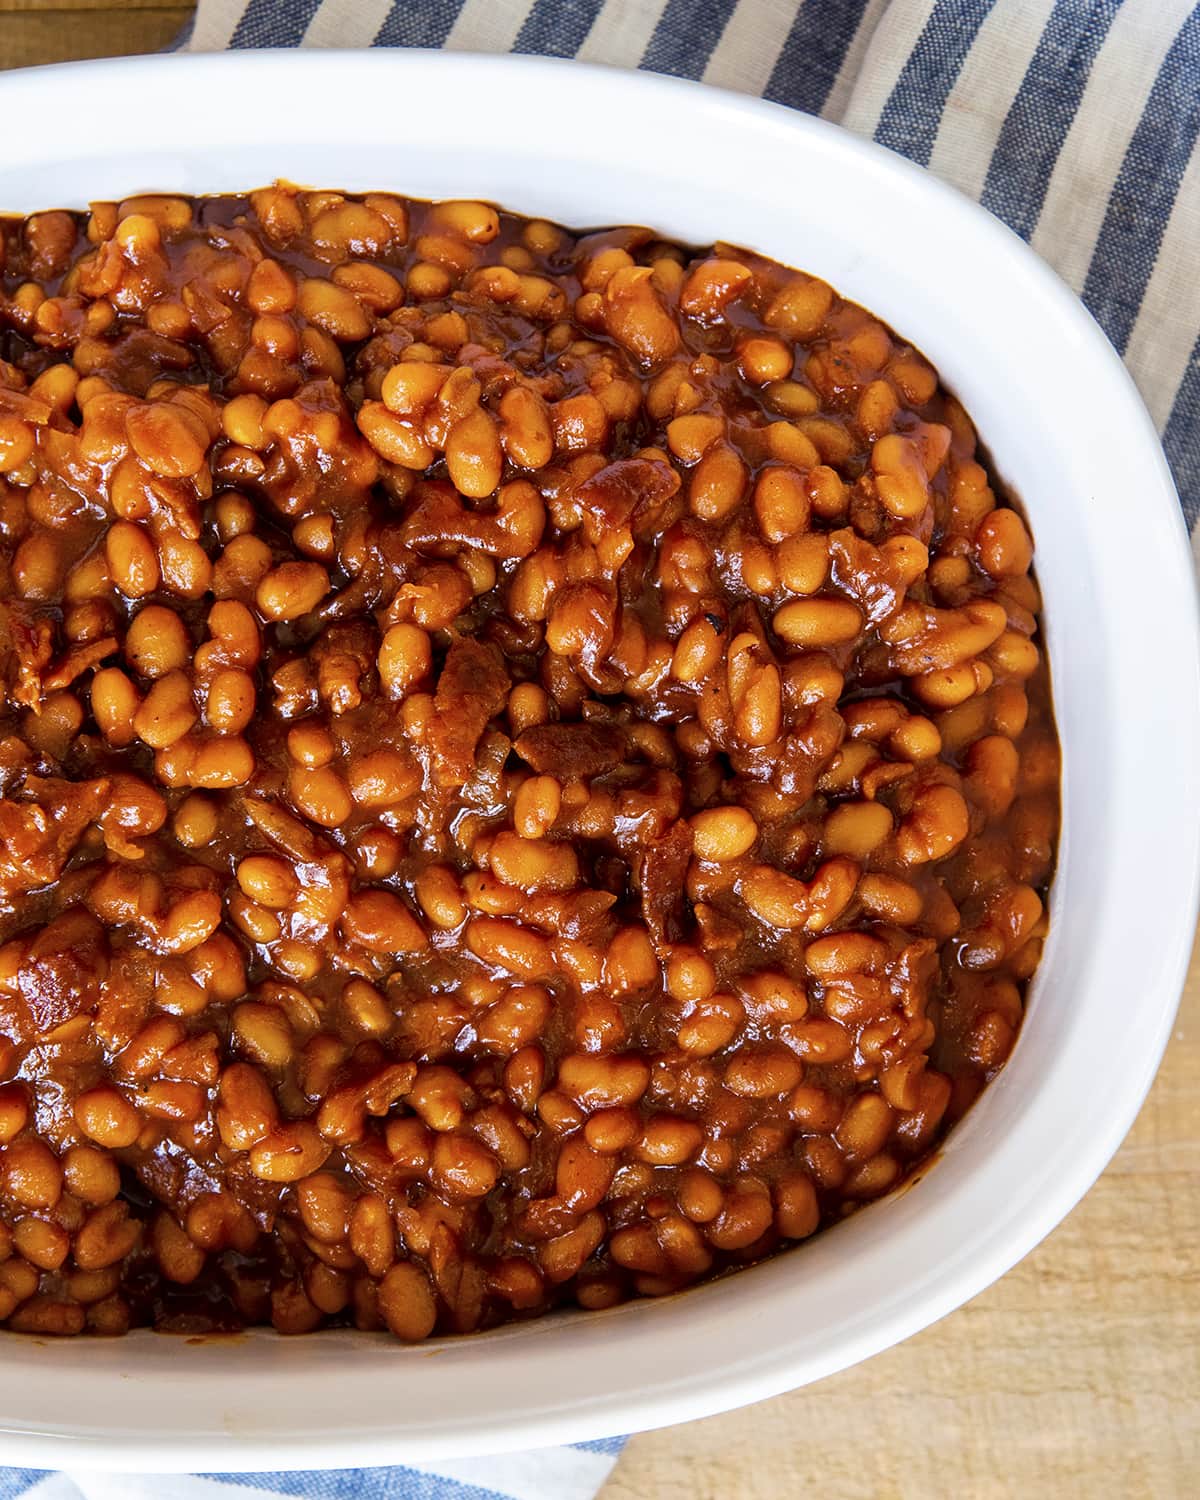 An overhead photo of a baking dish full of baked beans.